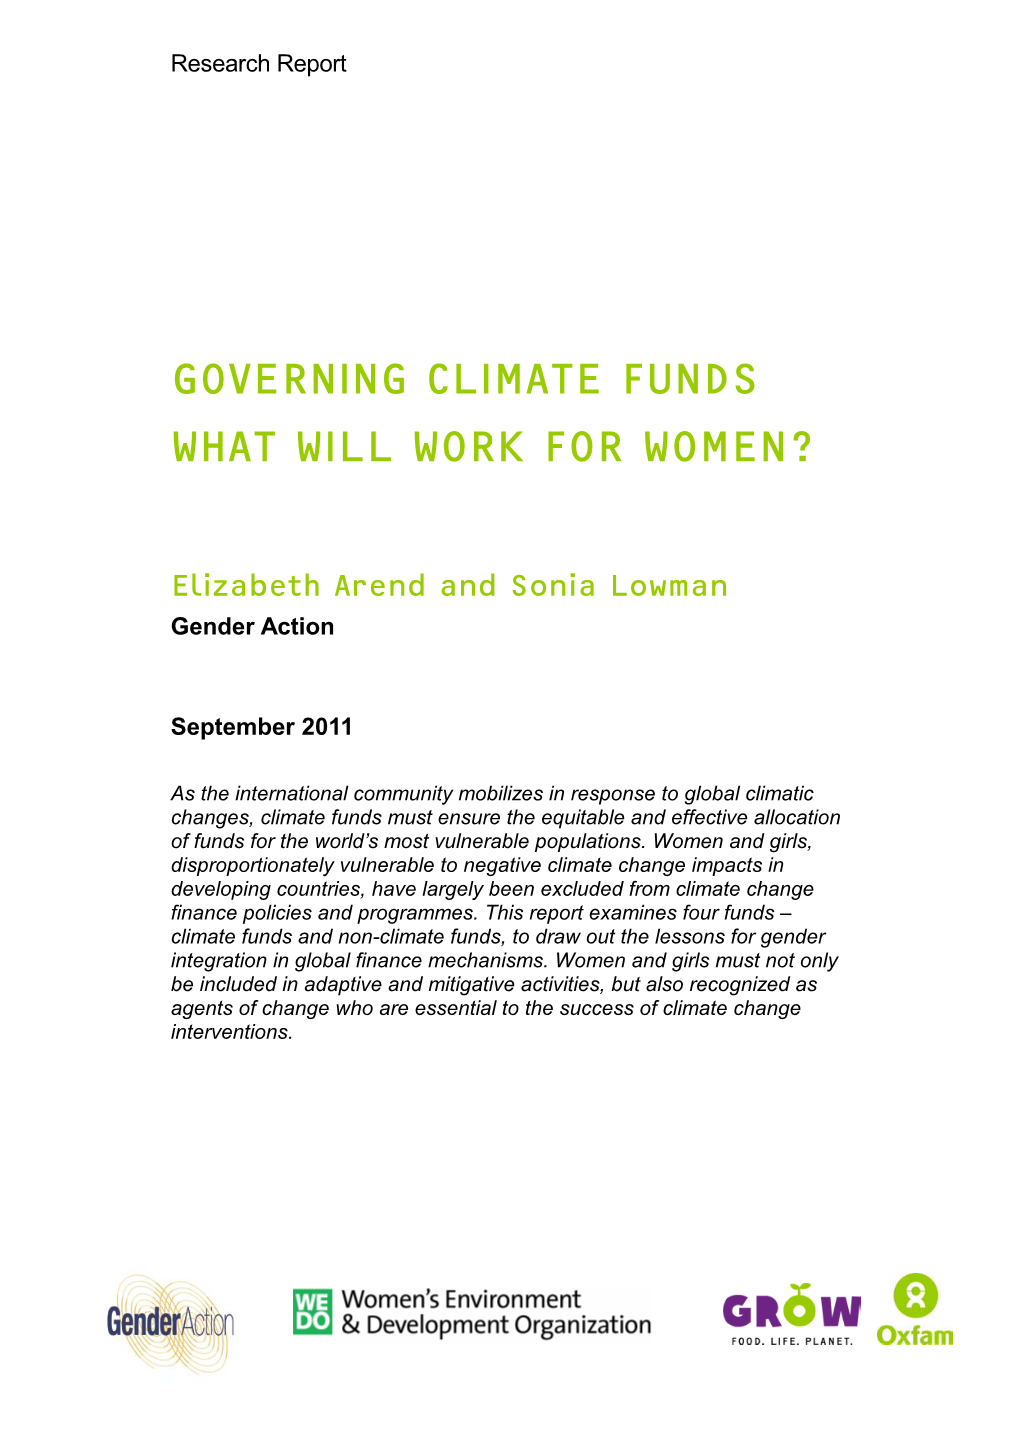 (2011). Governing Climate Funds: What Will Work for Women?